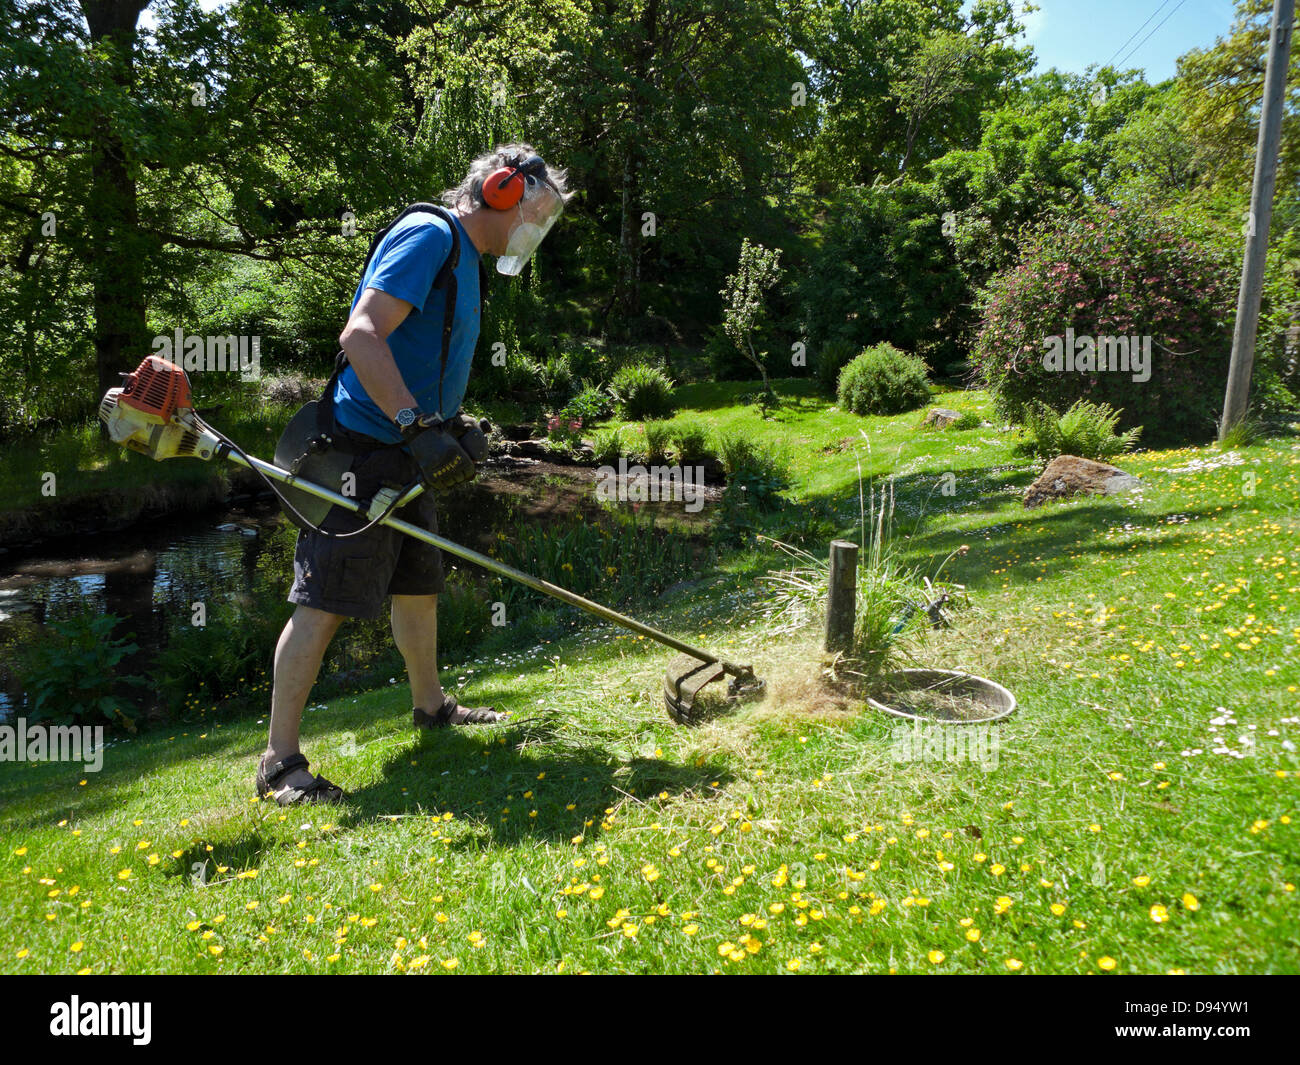 Man wearing safety equipment using strimmer to cut grass lawn in spring around a pond Carmarthenshire Wales UK  KATHY DEWITT Stock Photo